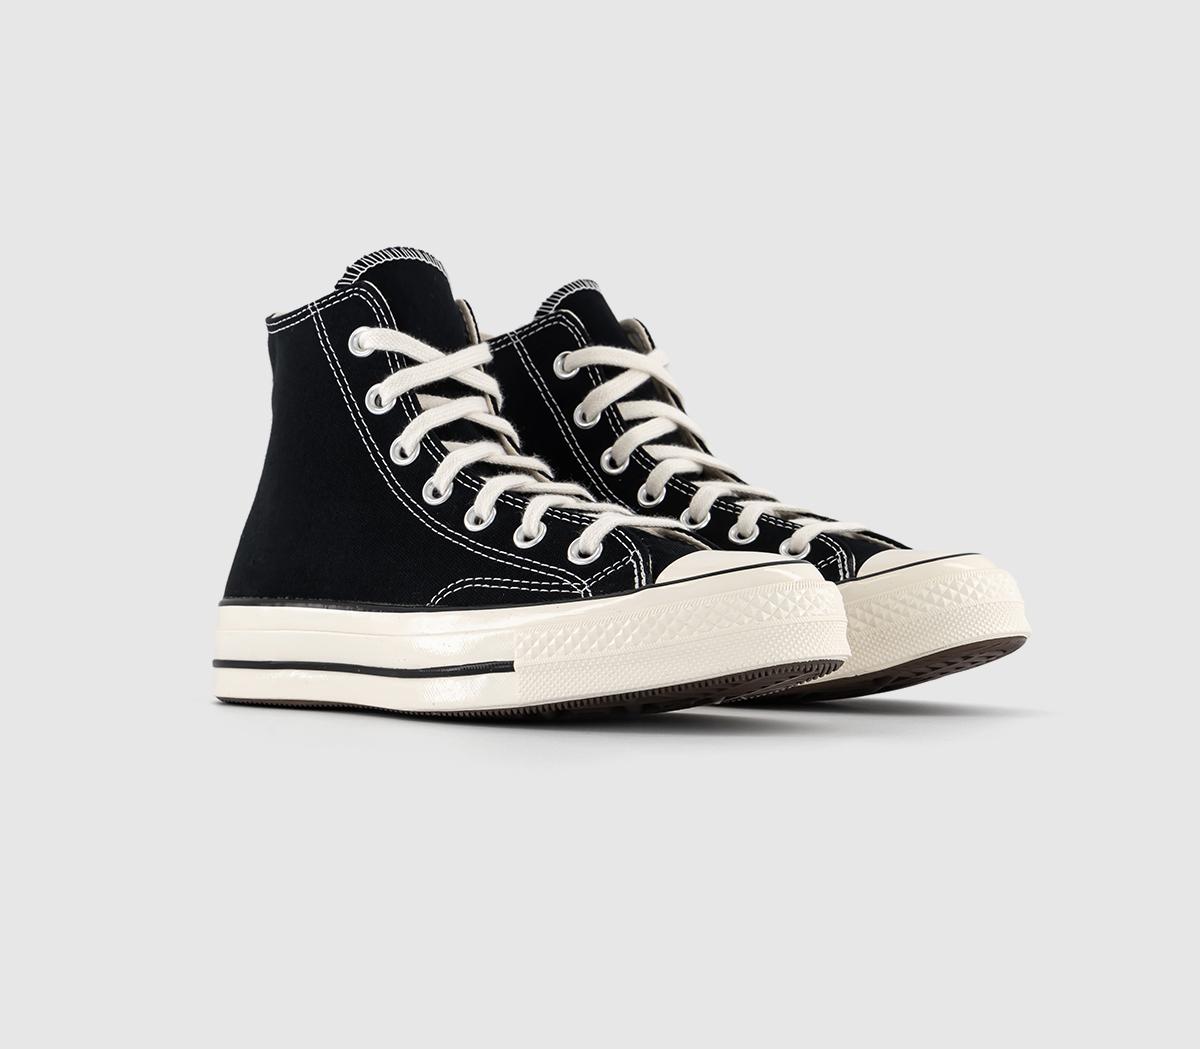 Converse Unisex Iconic All Star Hi 70’s Black Trainers, 4.5